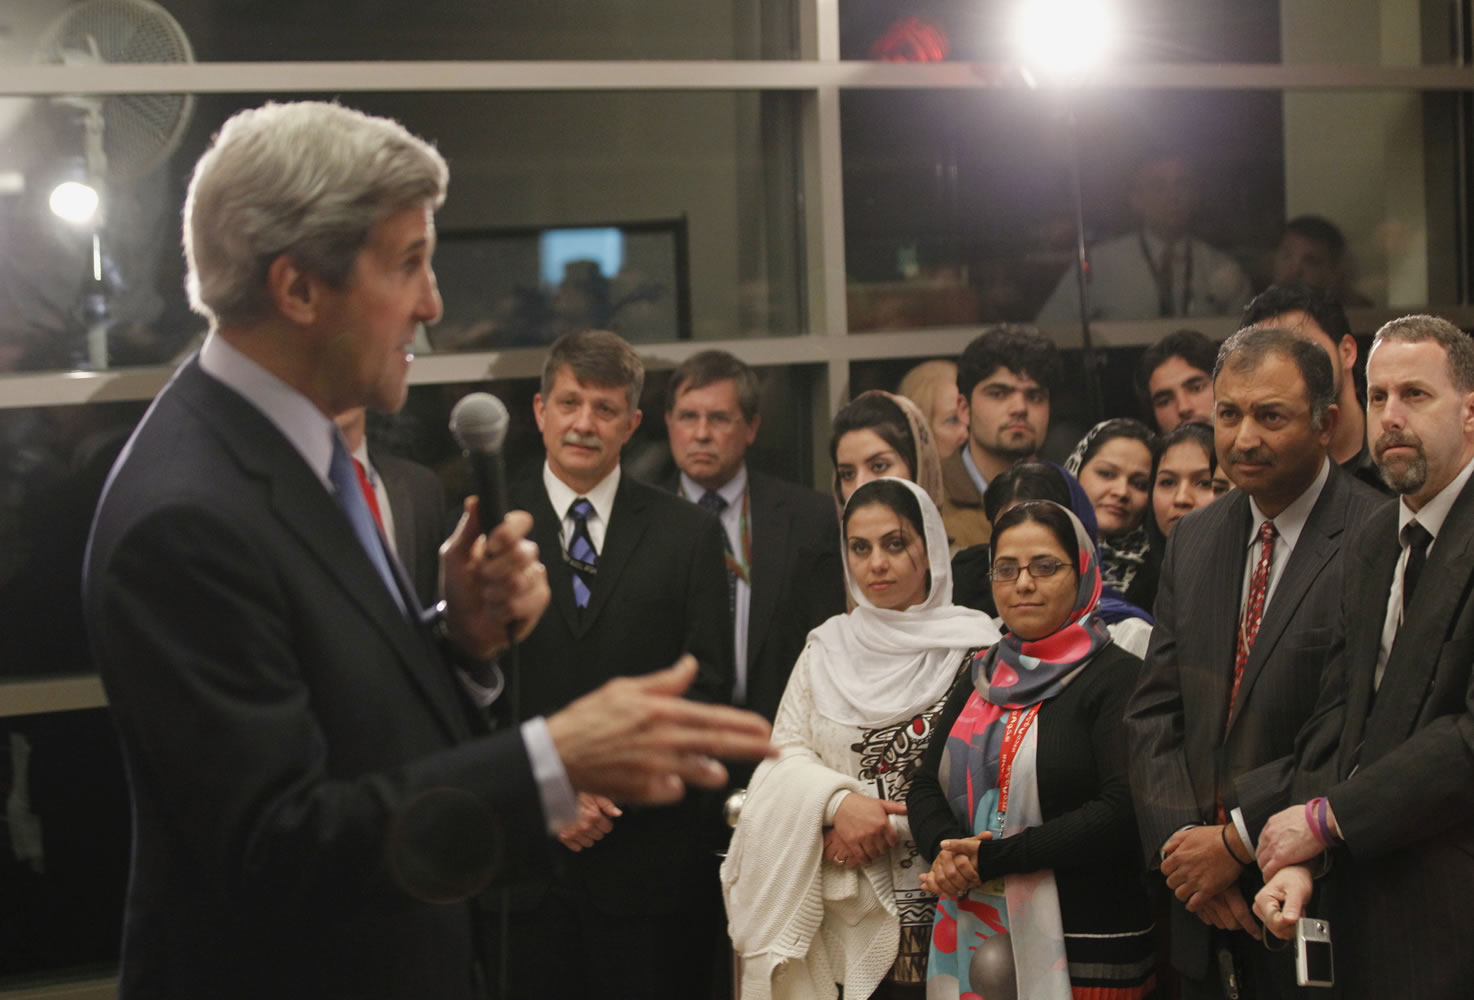 U.S. Secretary of State John Kerry talks to staff during his visit to the U.S.